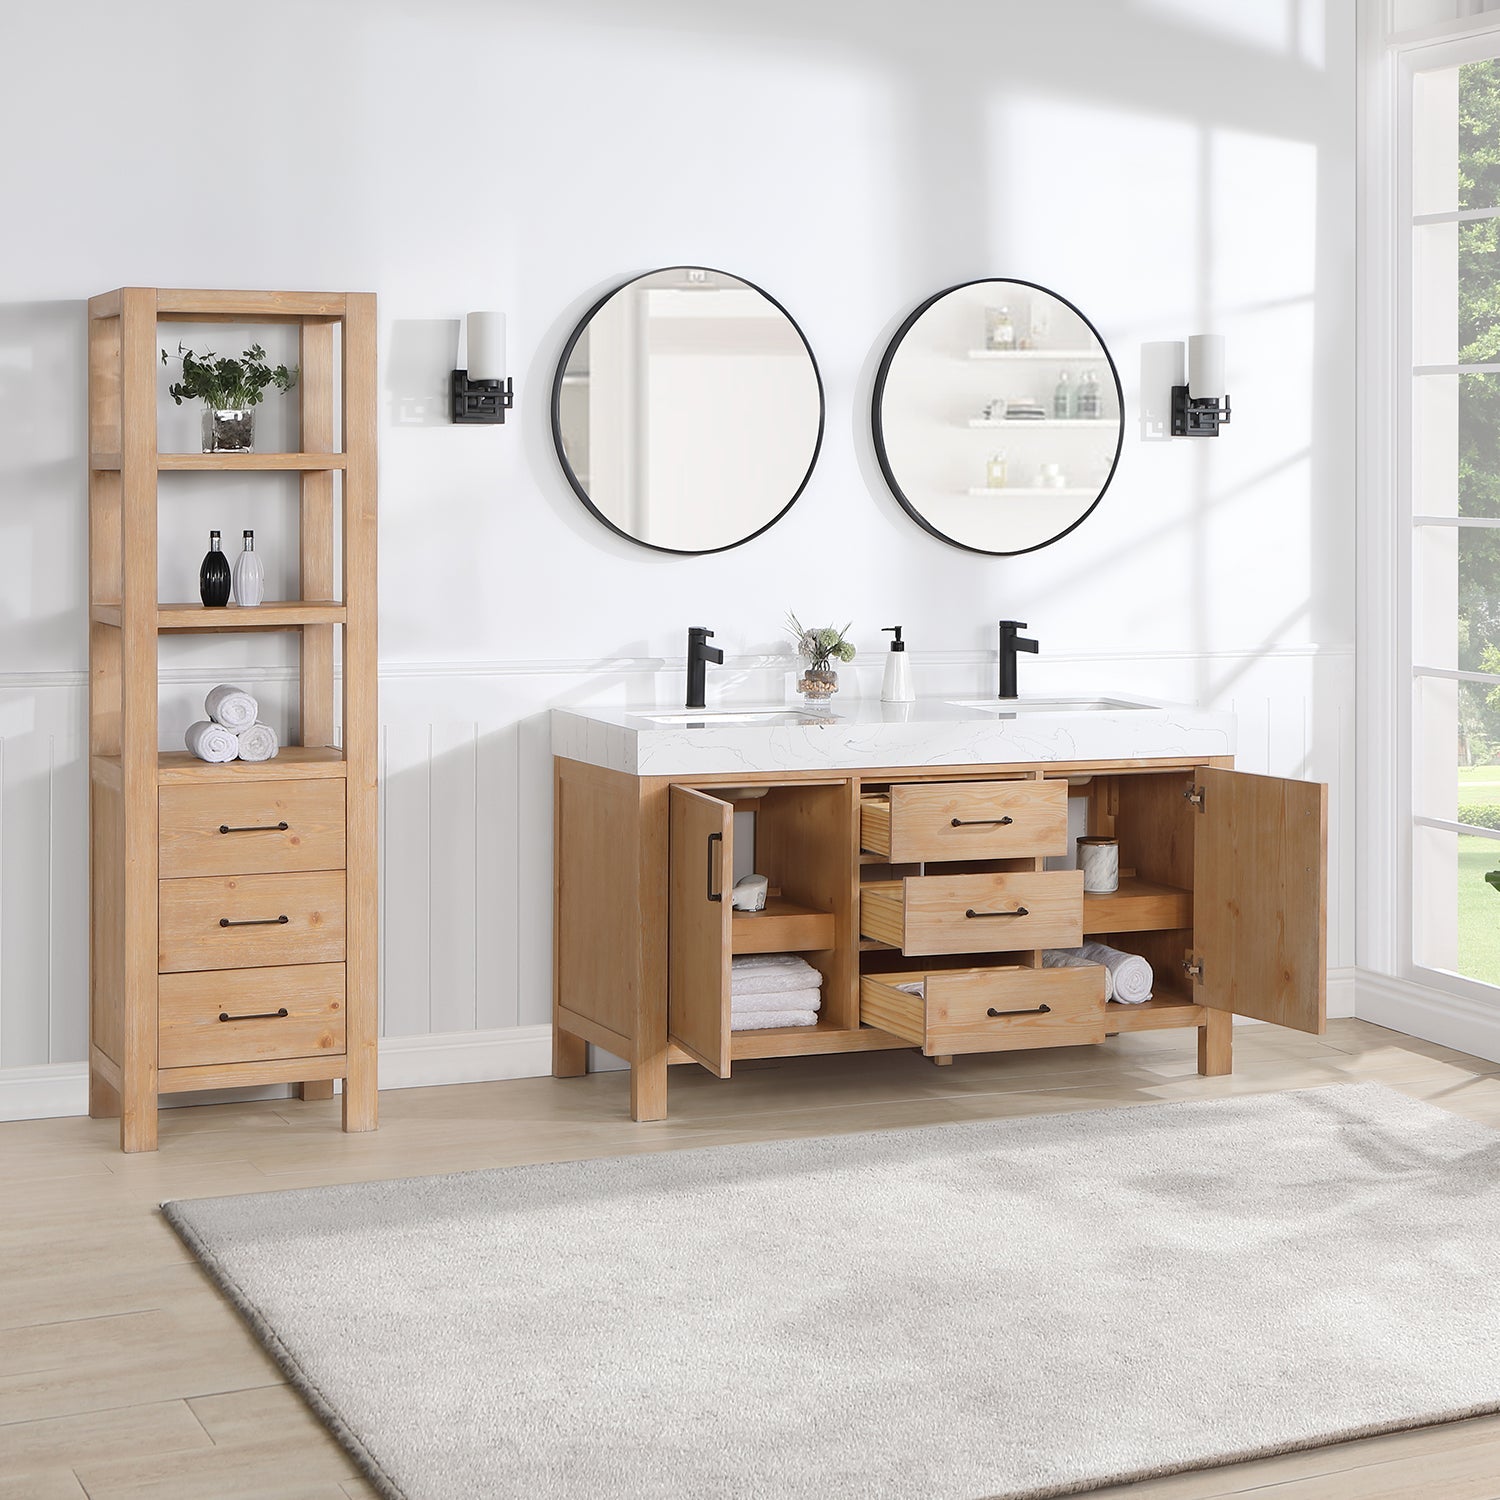 Vinnova Design León 60in. Free standing Double Bathroom Vanity in Fir Wood Brown with Composite top in Lightning White - New Star Living